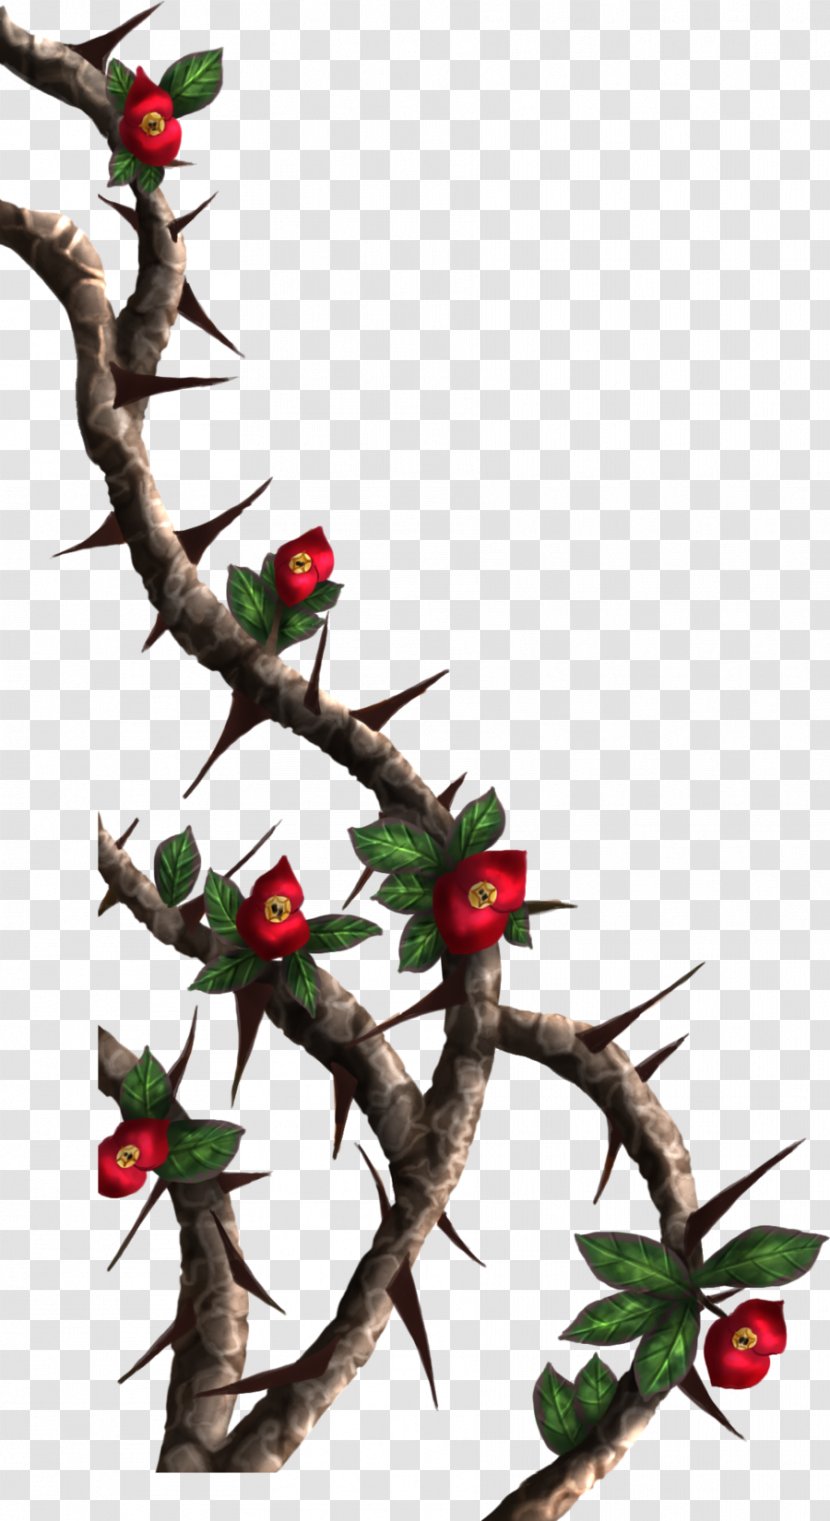 Thorns, Spines, And Prickles Rose Crown Of Thorns Drawing Clip Art - Headpiece - Thorn Transparent PNG